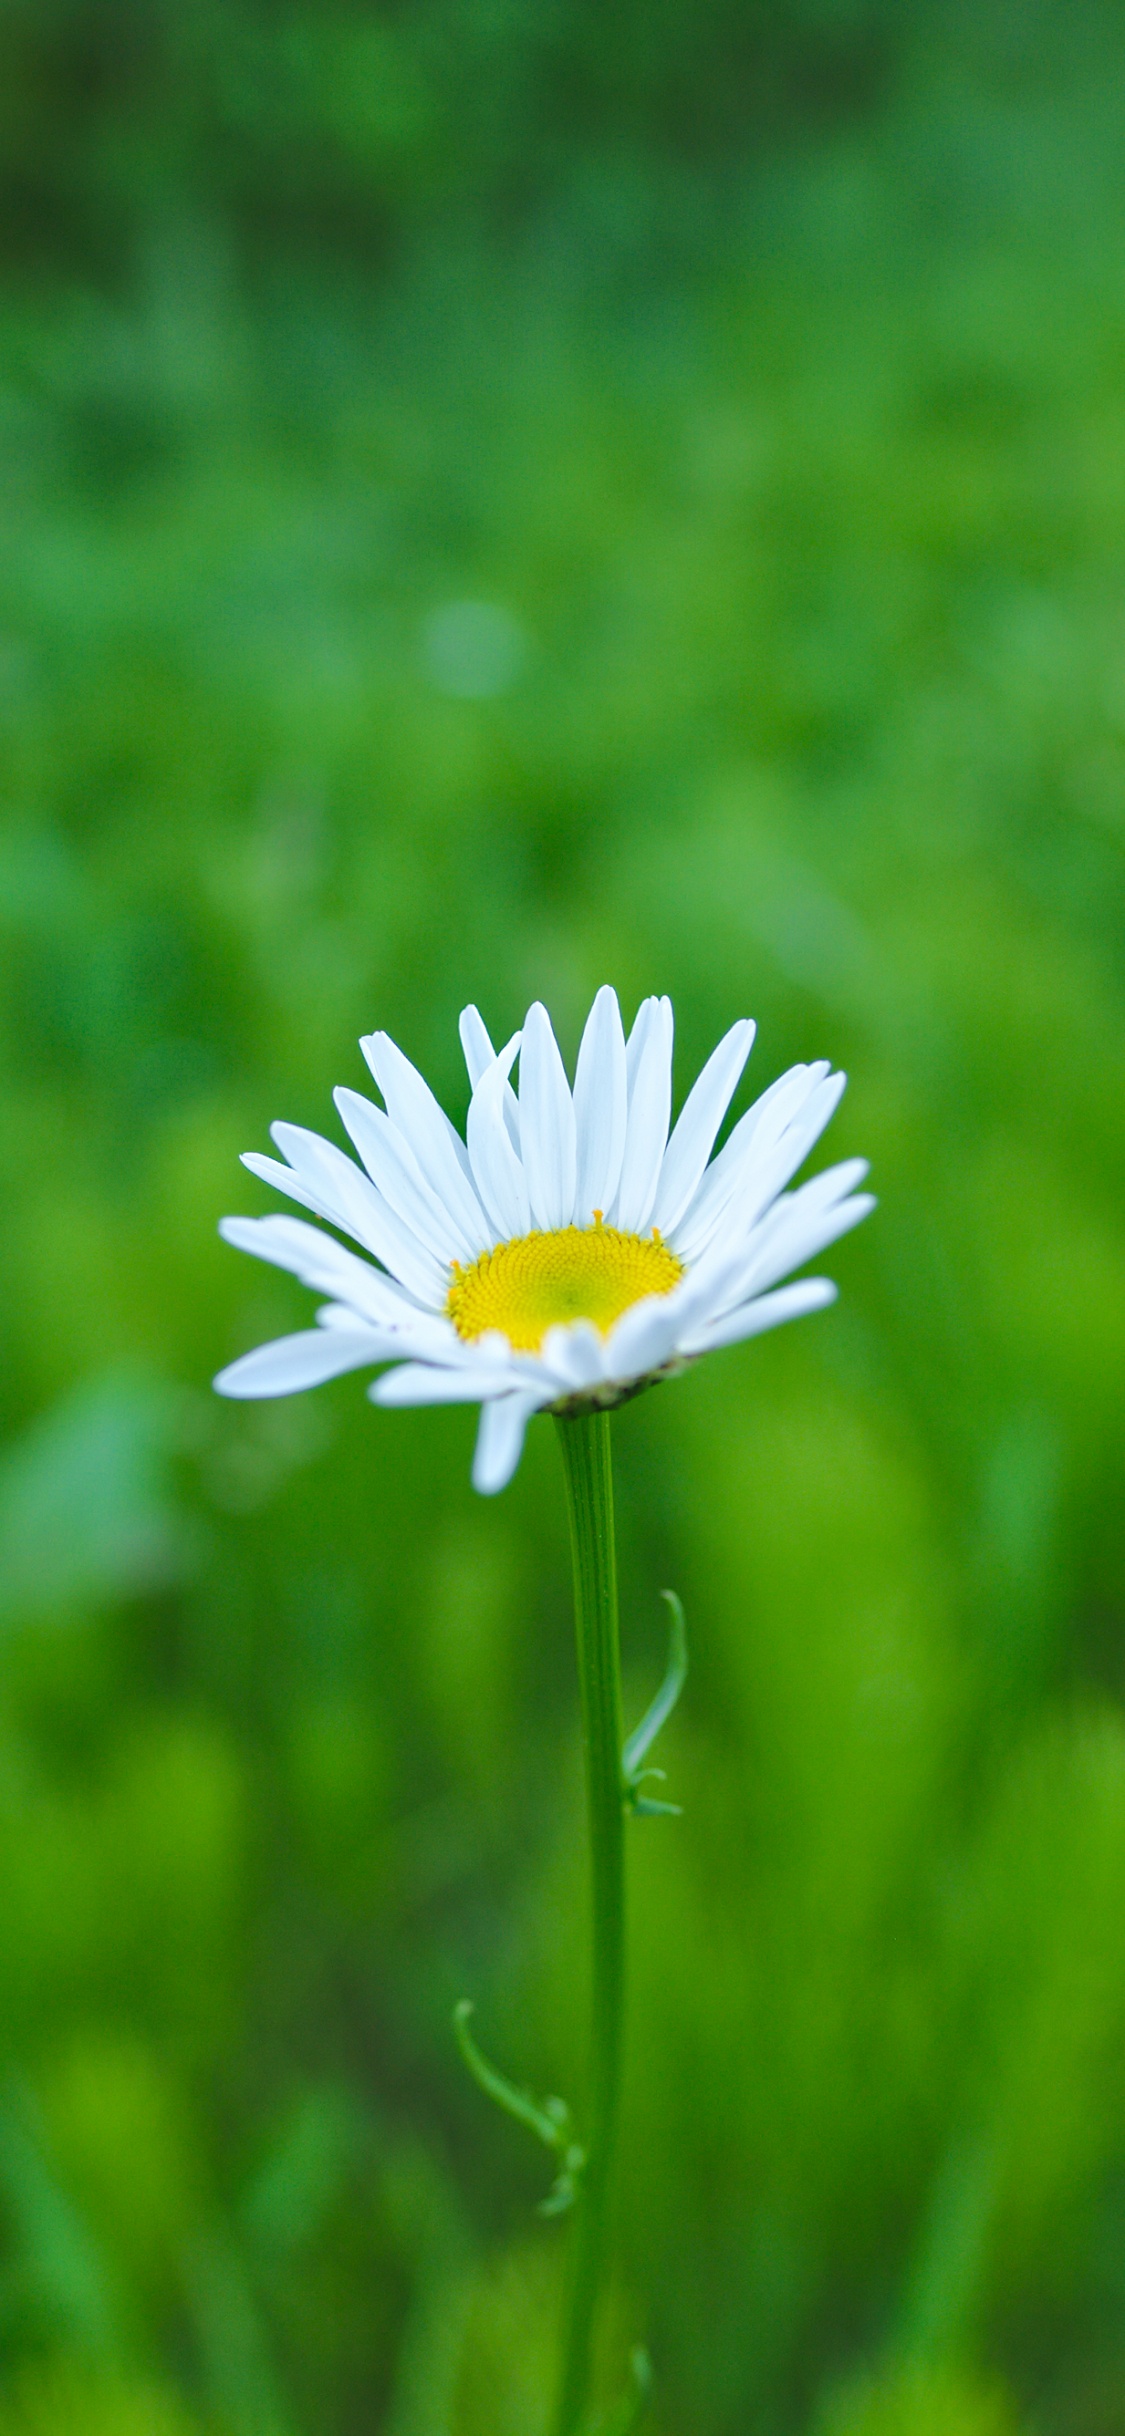 White Daisy in Bloom During Daytime. Wallpaper in 1125x2436 Resolution